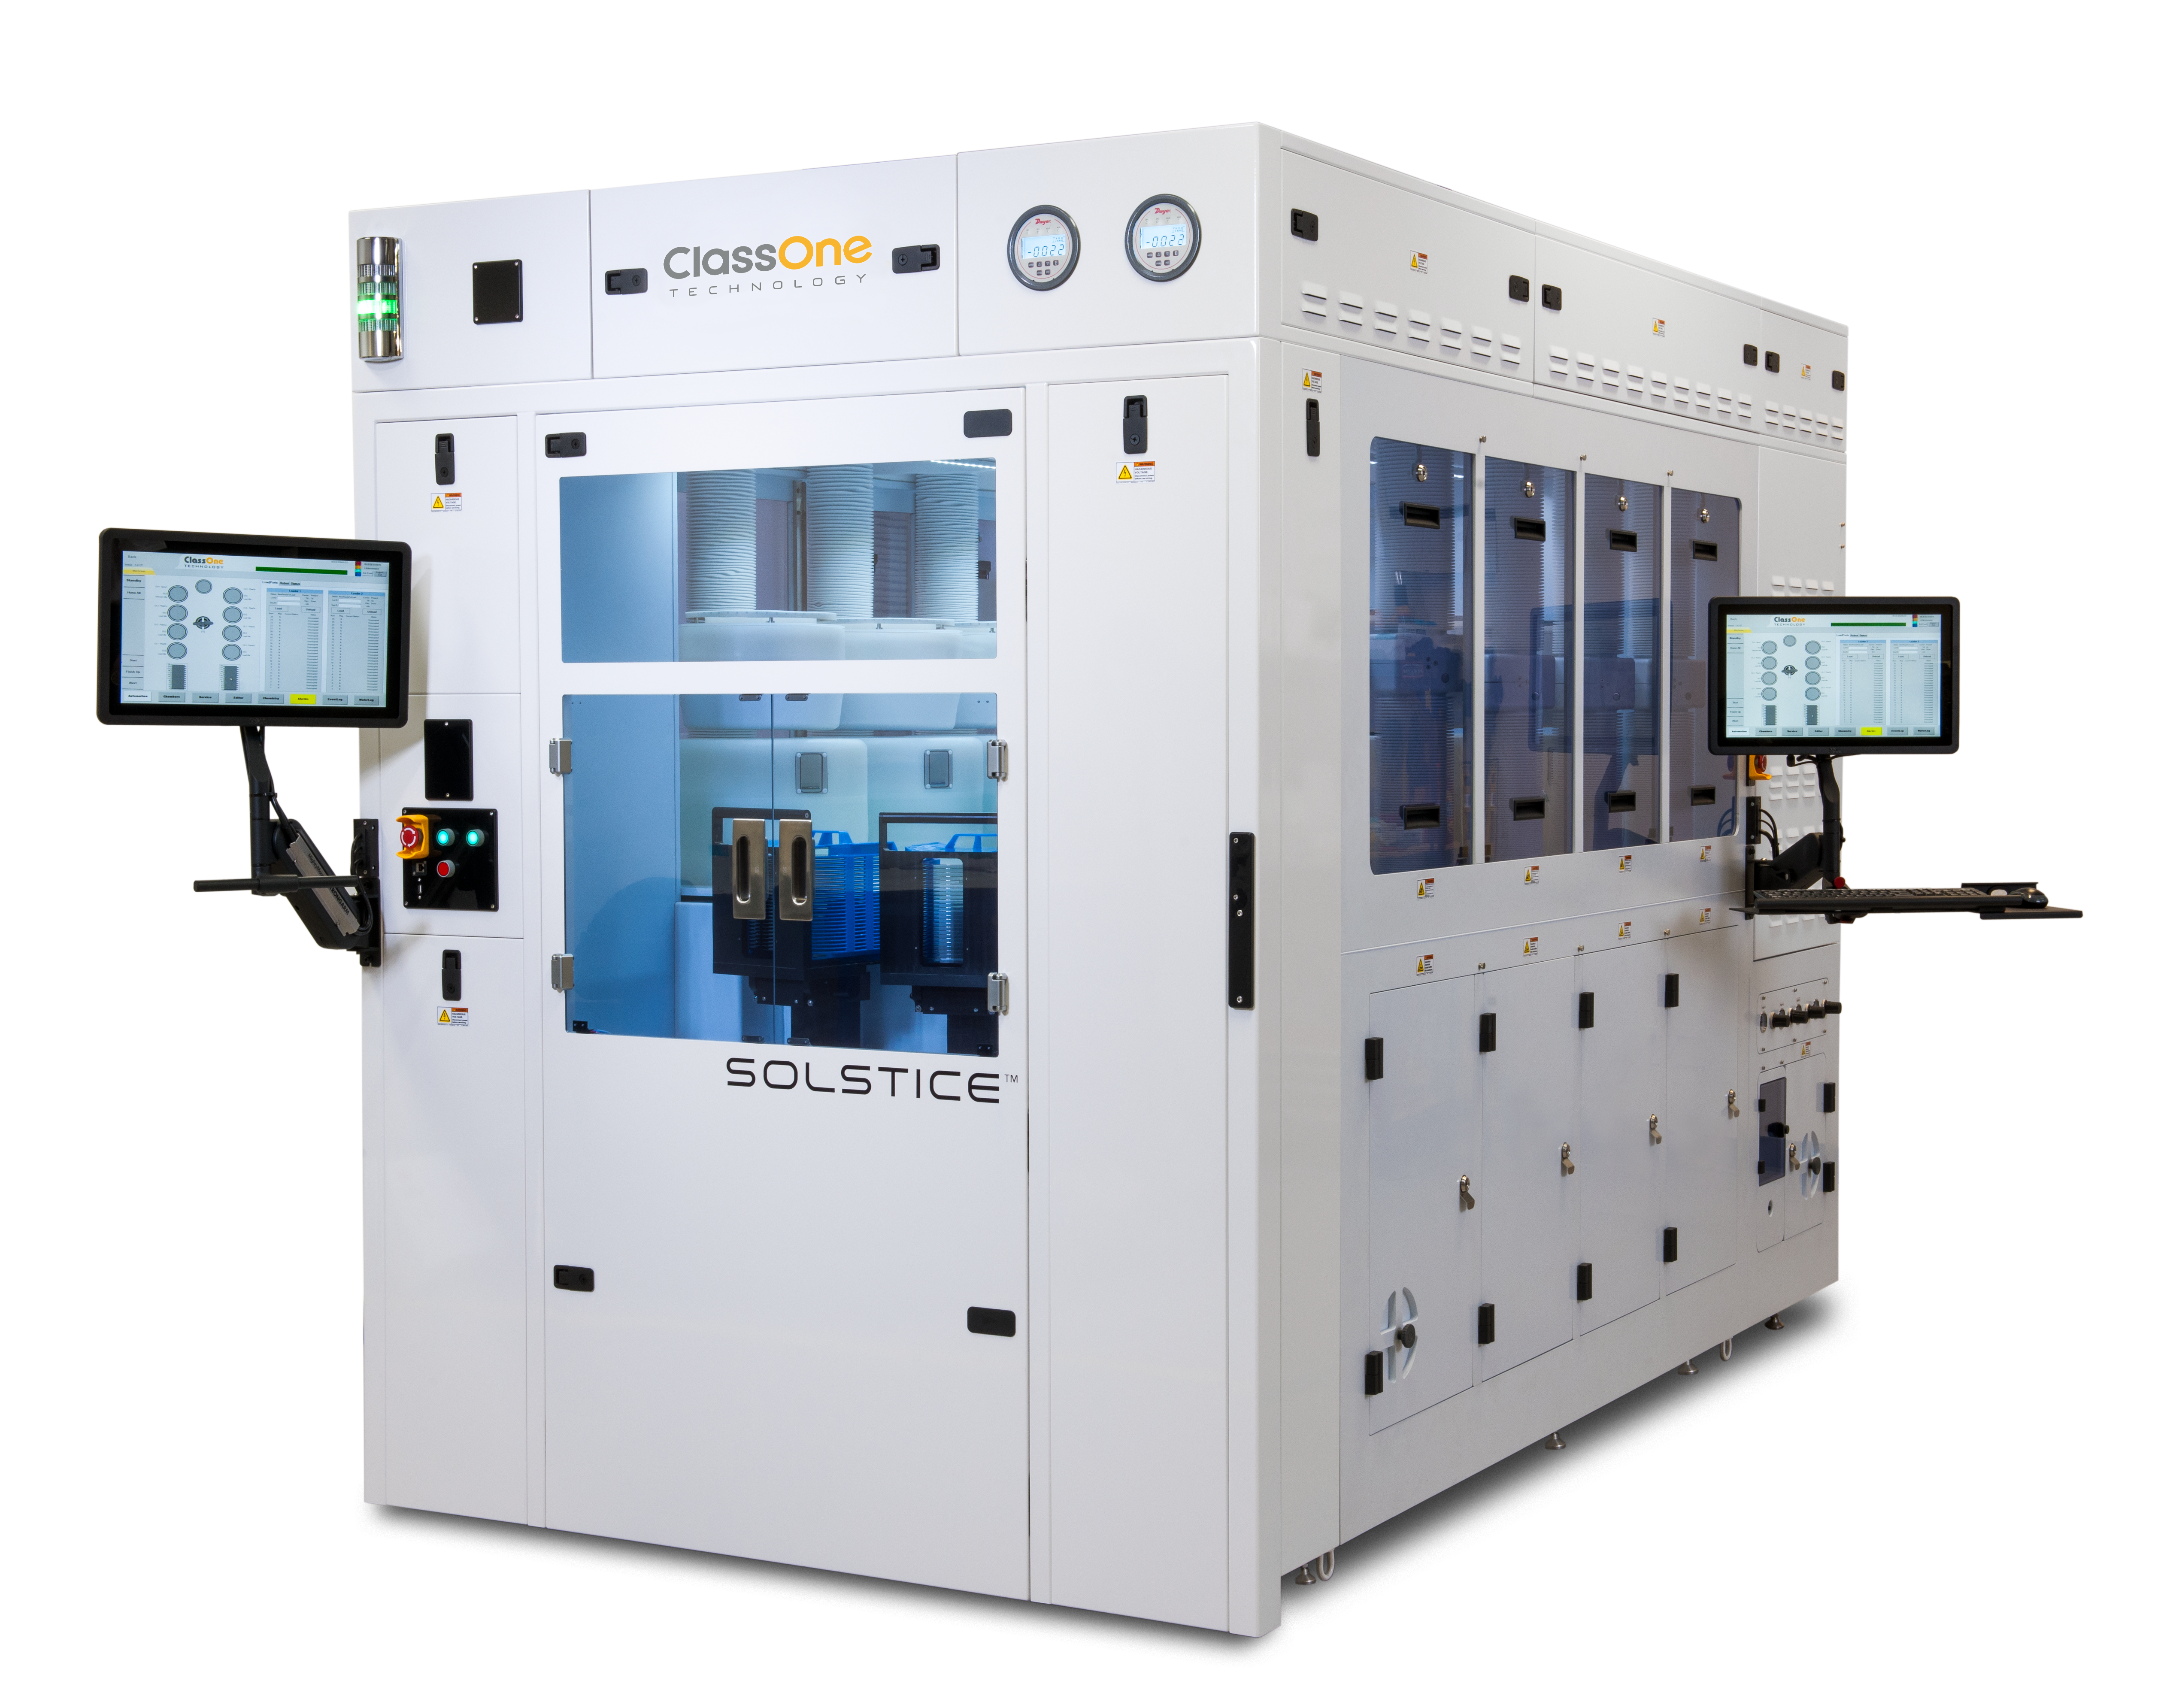 Solstice S8 Single-Wafer System from ClassOne